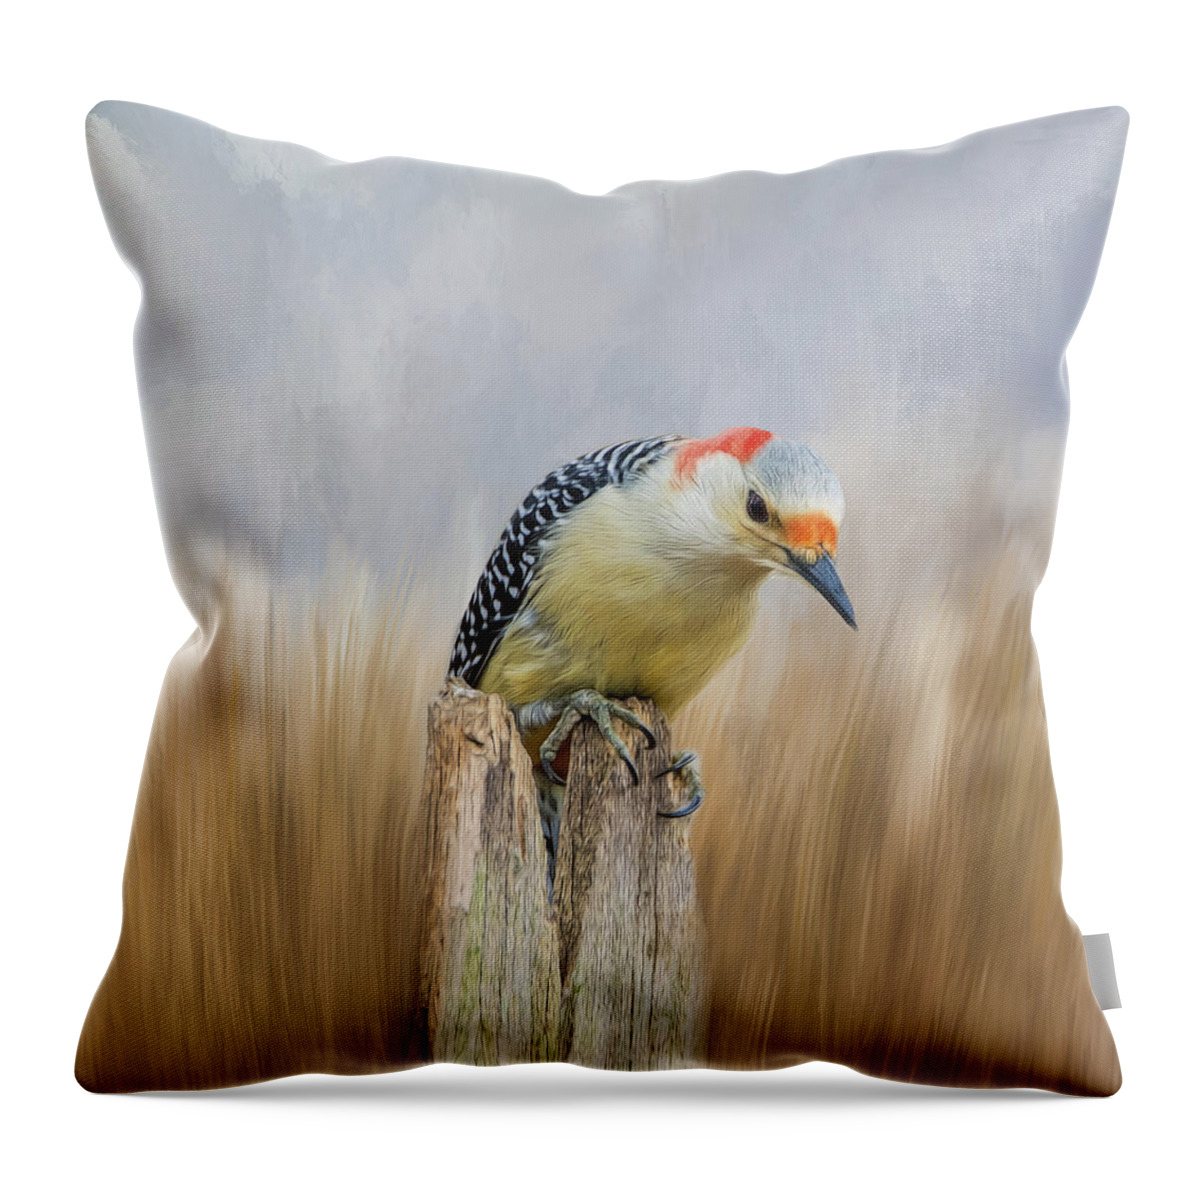 Woodpecker Throw Pillow featuring the photograph The Woodpecker by Cathy Kovarik